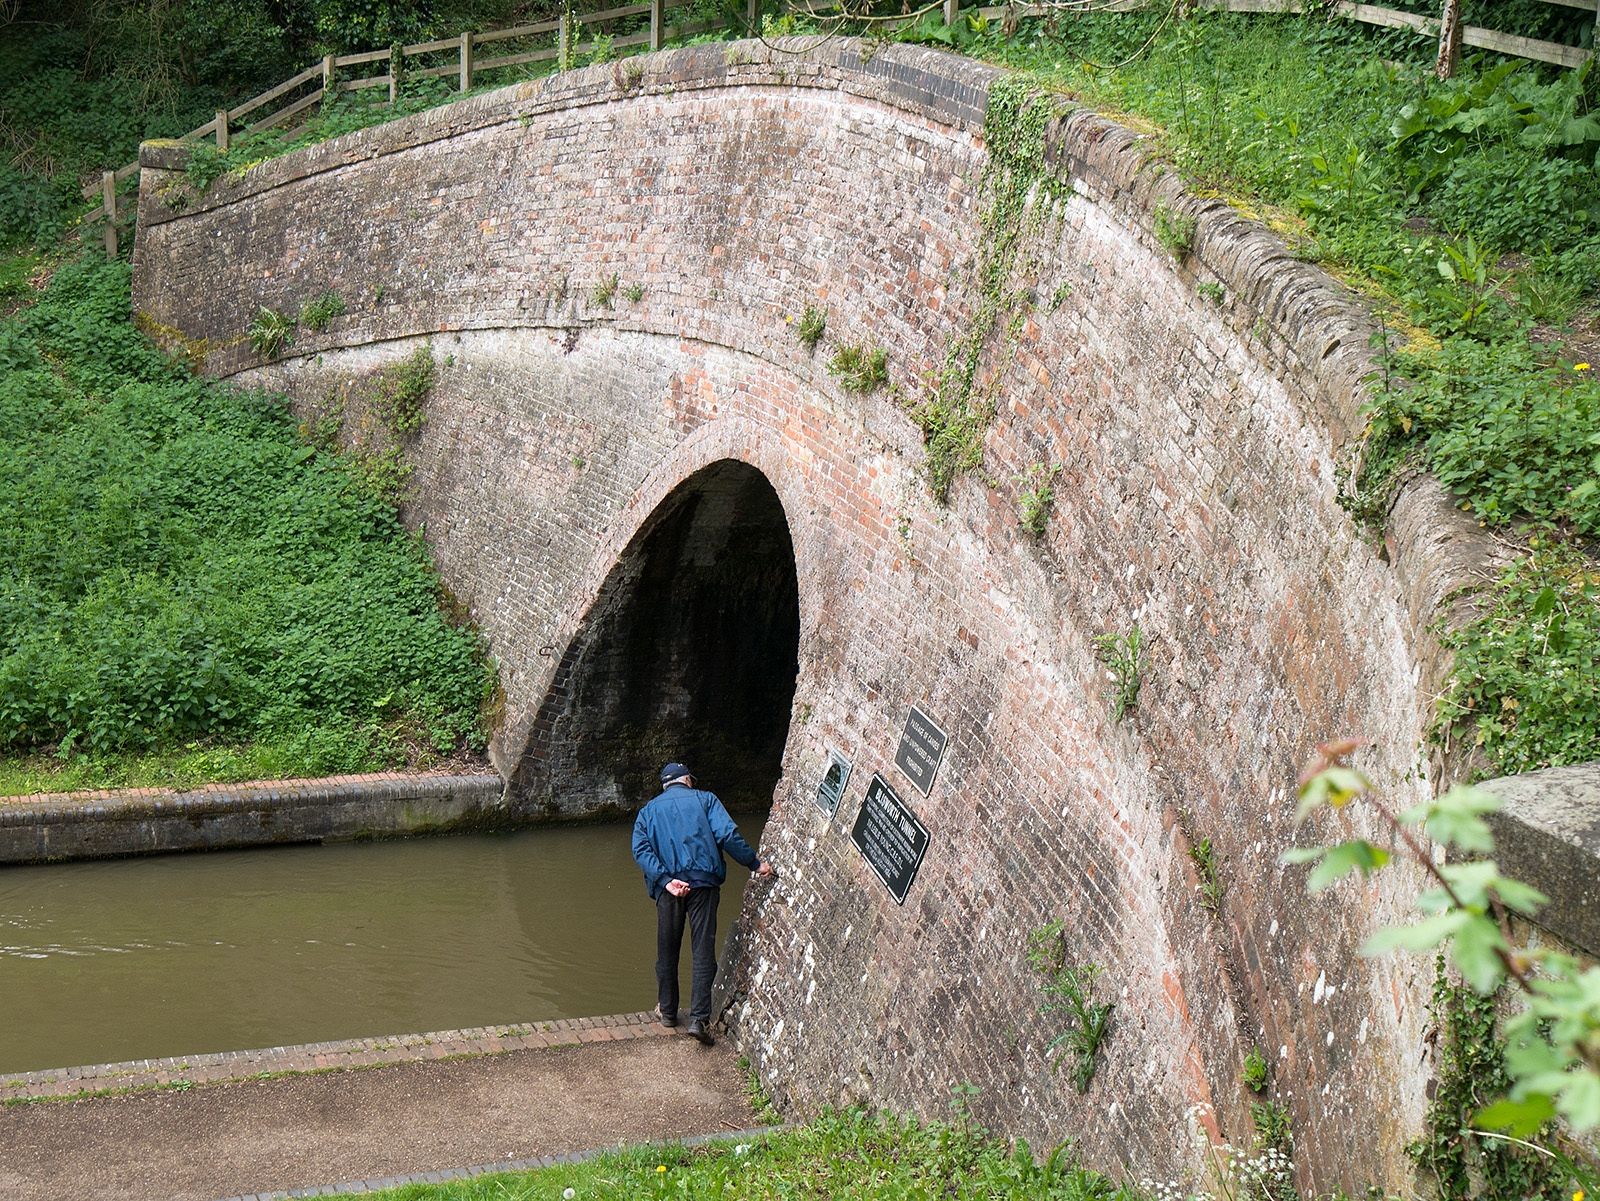 Looking down on the entrance to the tunnel - notice no towpath in the tunnel